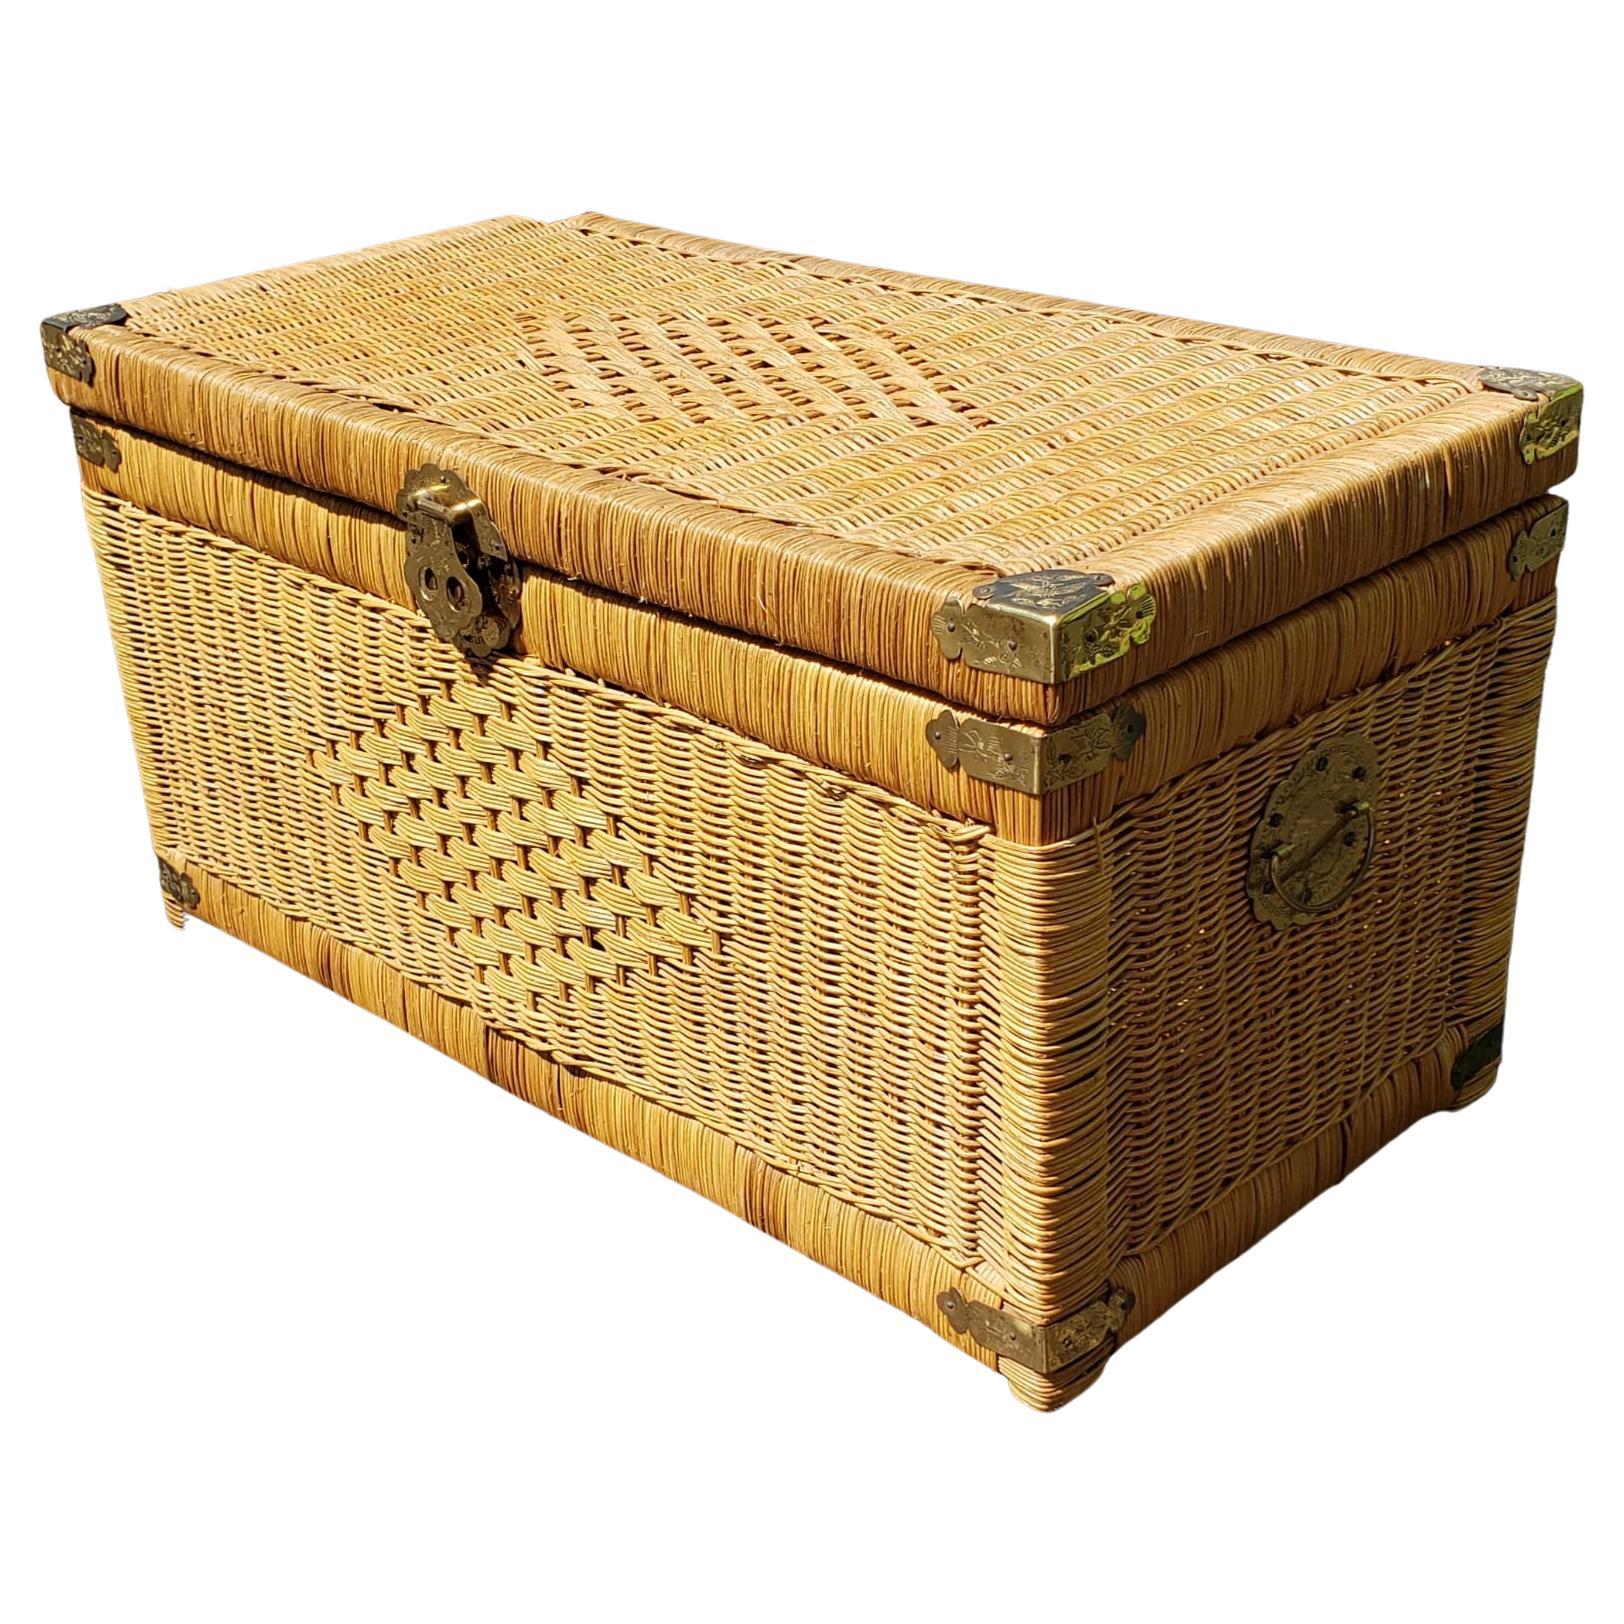 Midcentury Asian Style Brass Mounted Wicker Blanket Chest Storage Trunk in good vintage condition and measuring 36